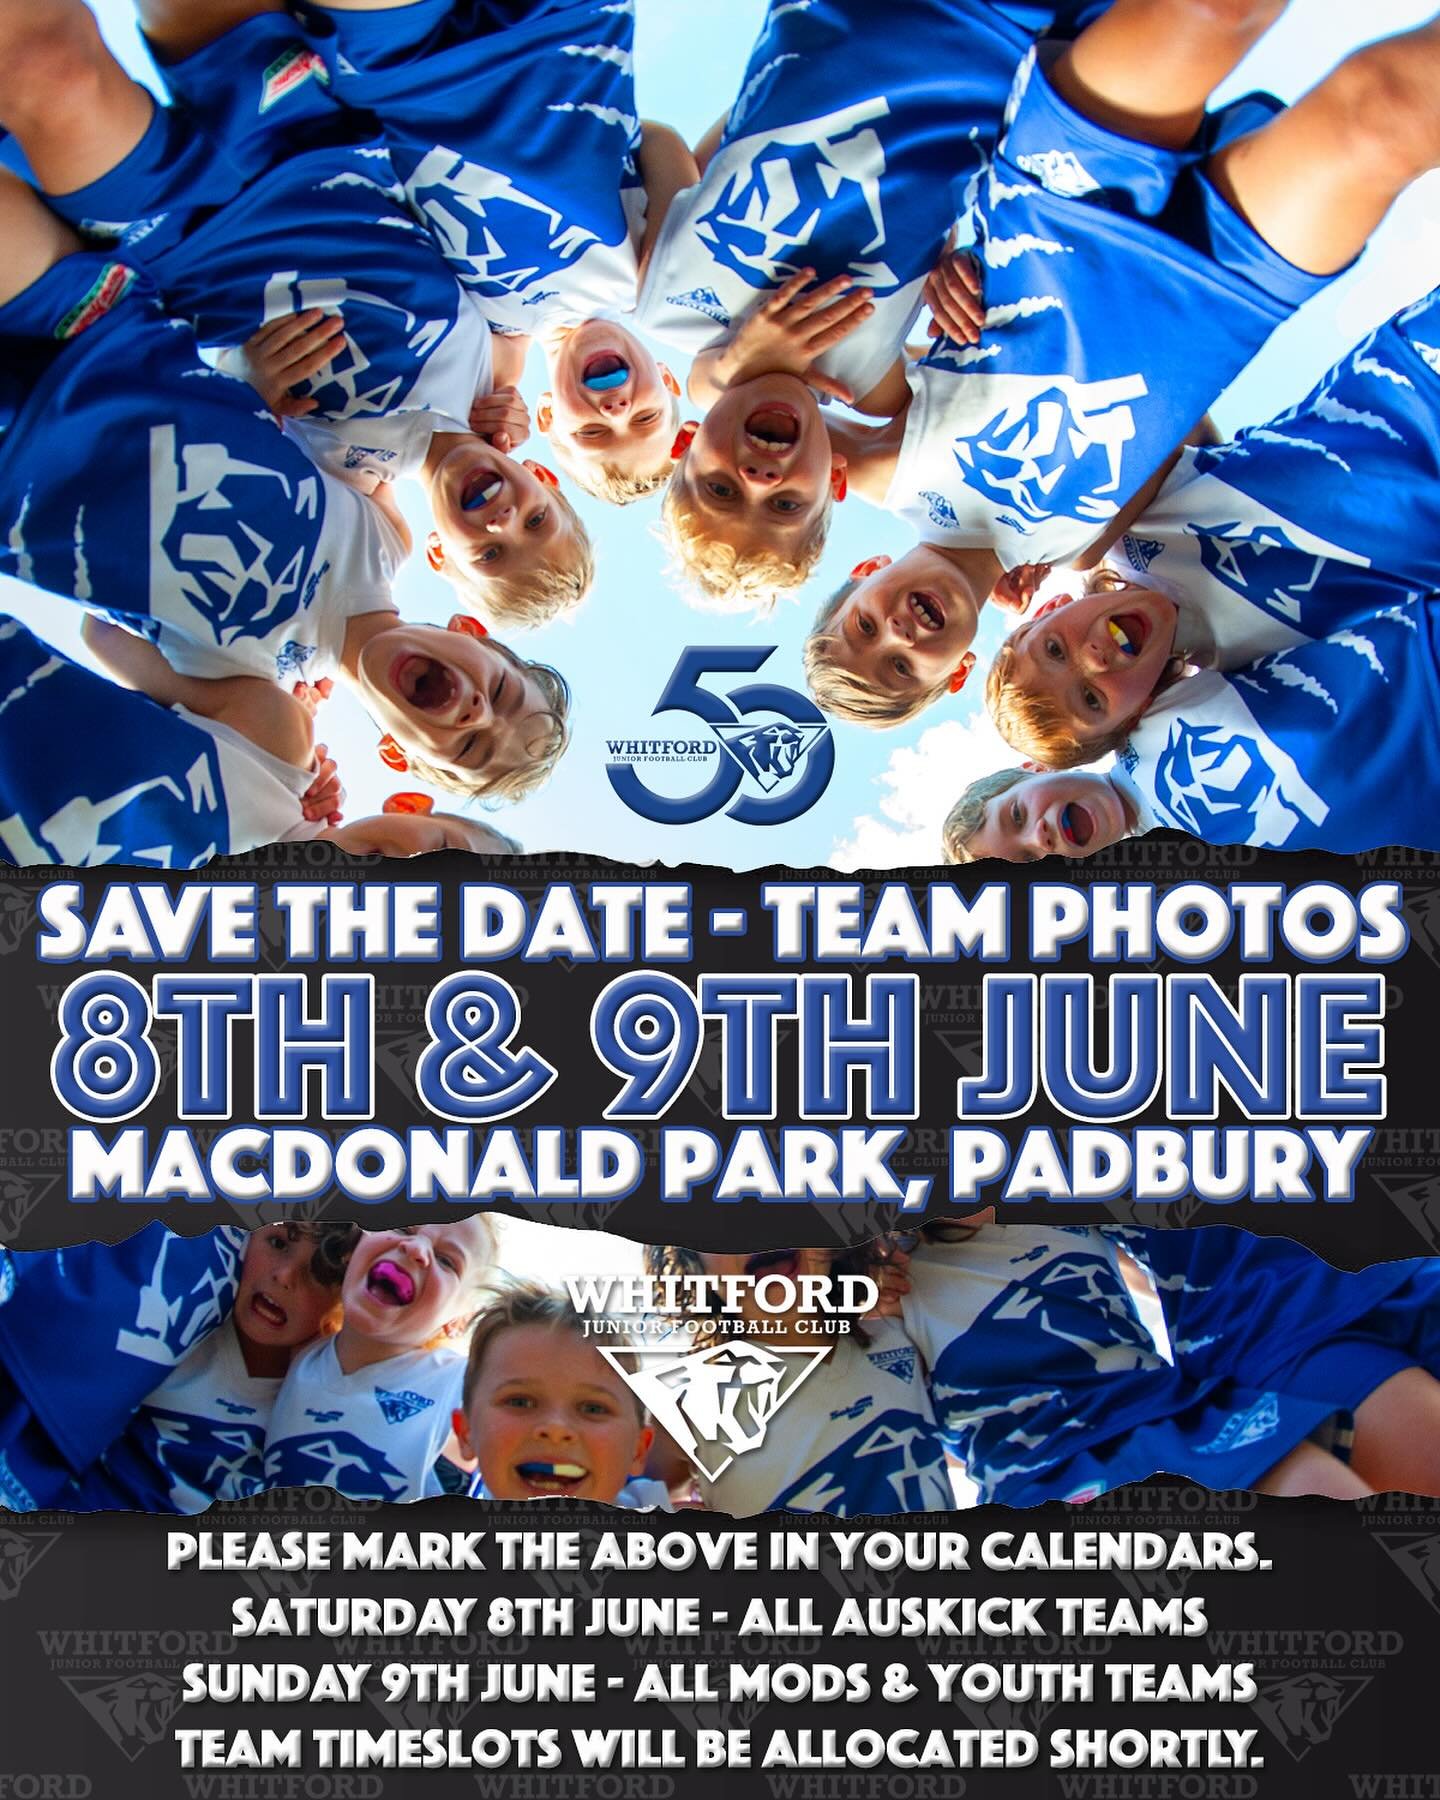 Save the Date&hellip; Lock it in your diaries people.
Team Photos will be the weekend of the 8th &amp; 9th of June at the MacDonald Park Clubrooms.
8th June - All Auskick
9th June - All Mods &amp; Youth Teams
Time slots are a logistical nightmare, so